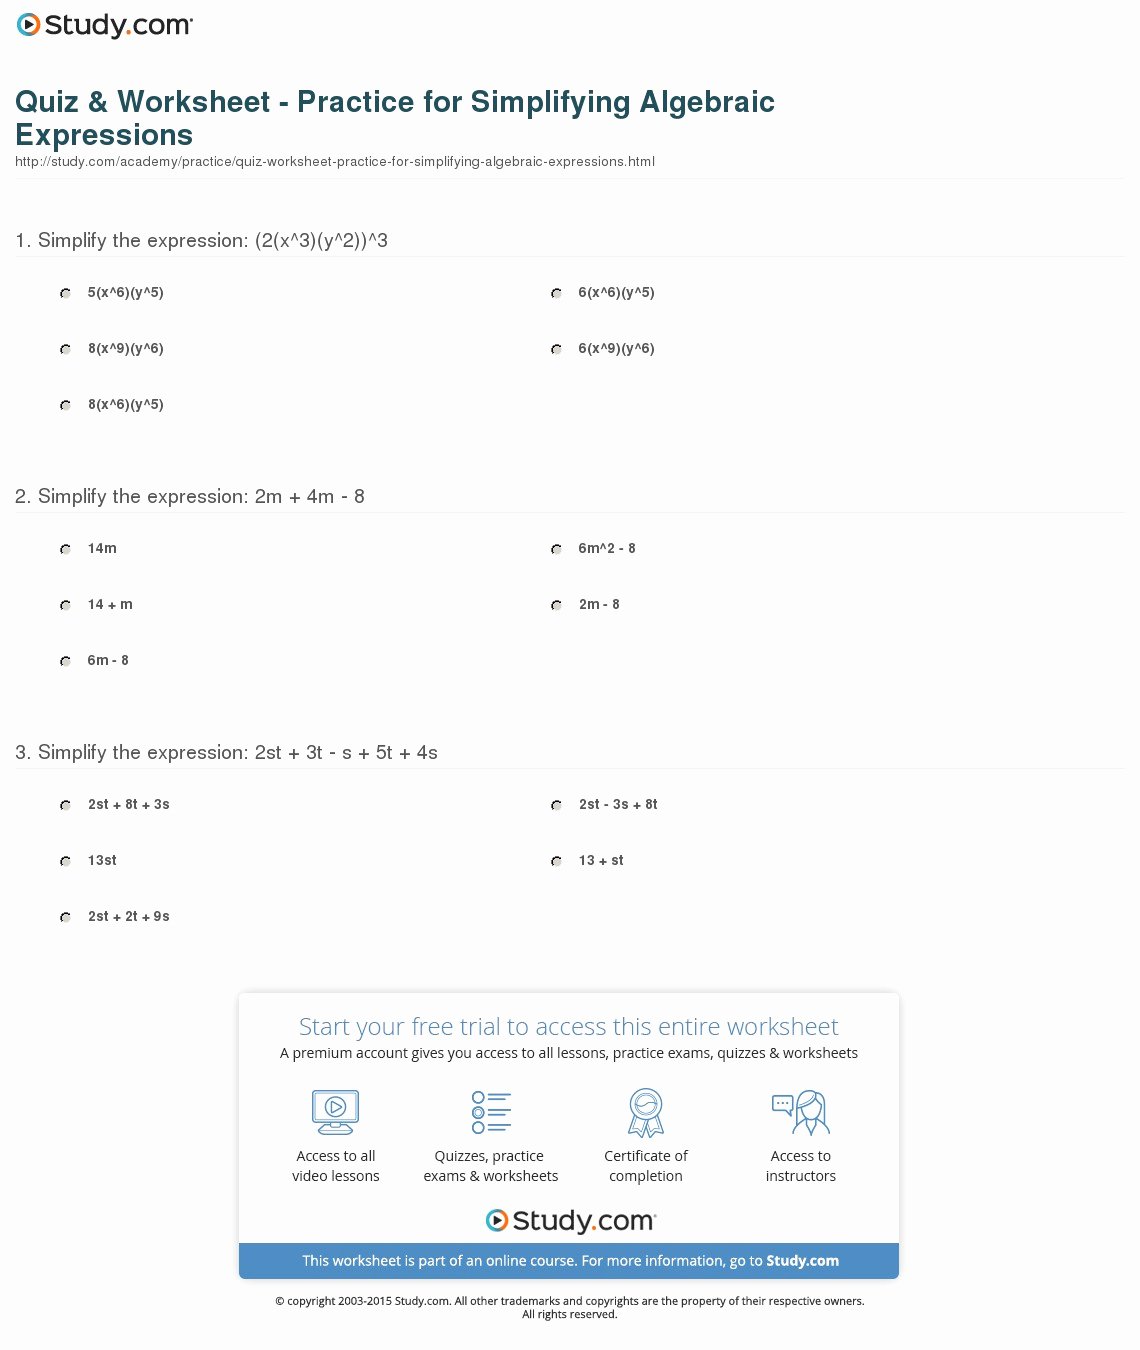 Simplifying Algebraic Expressions Worksheet Answers Inspirational Quiz & Worksheet Practice for Simplifying Algebraic